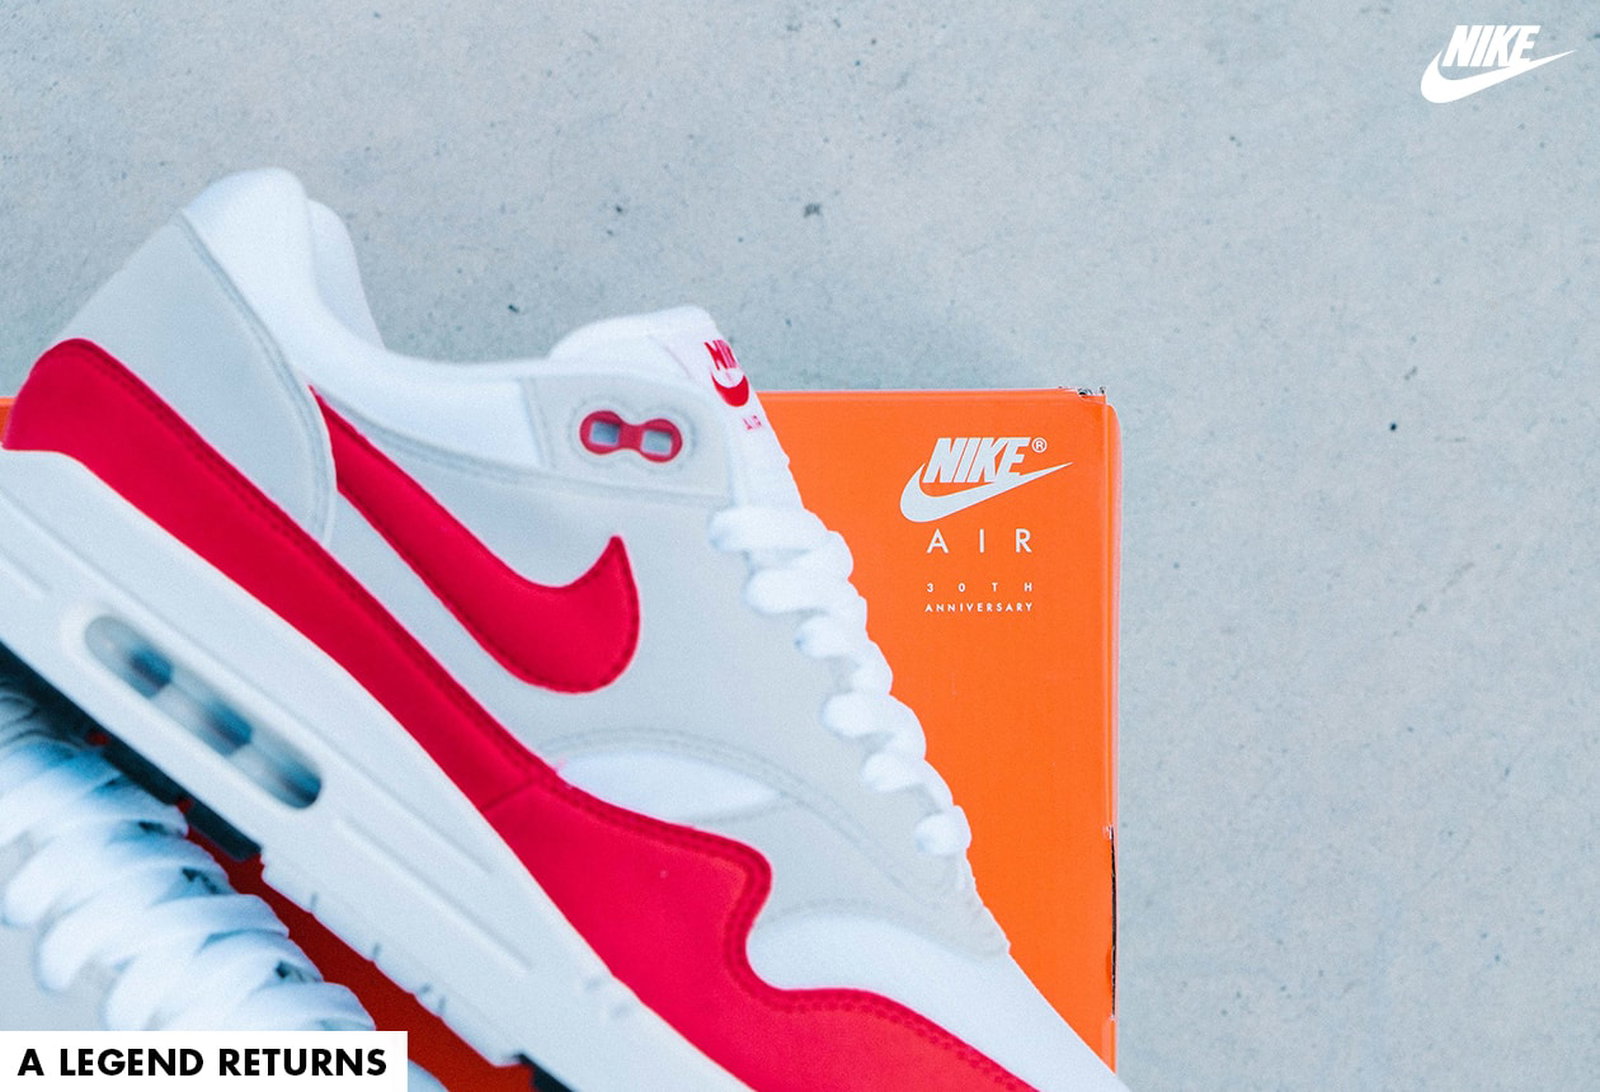 Hype DC: Hype Source | Nike Air Max 1 